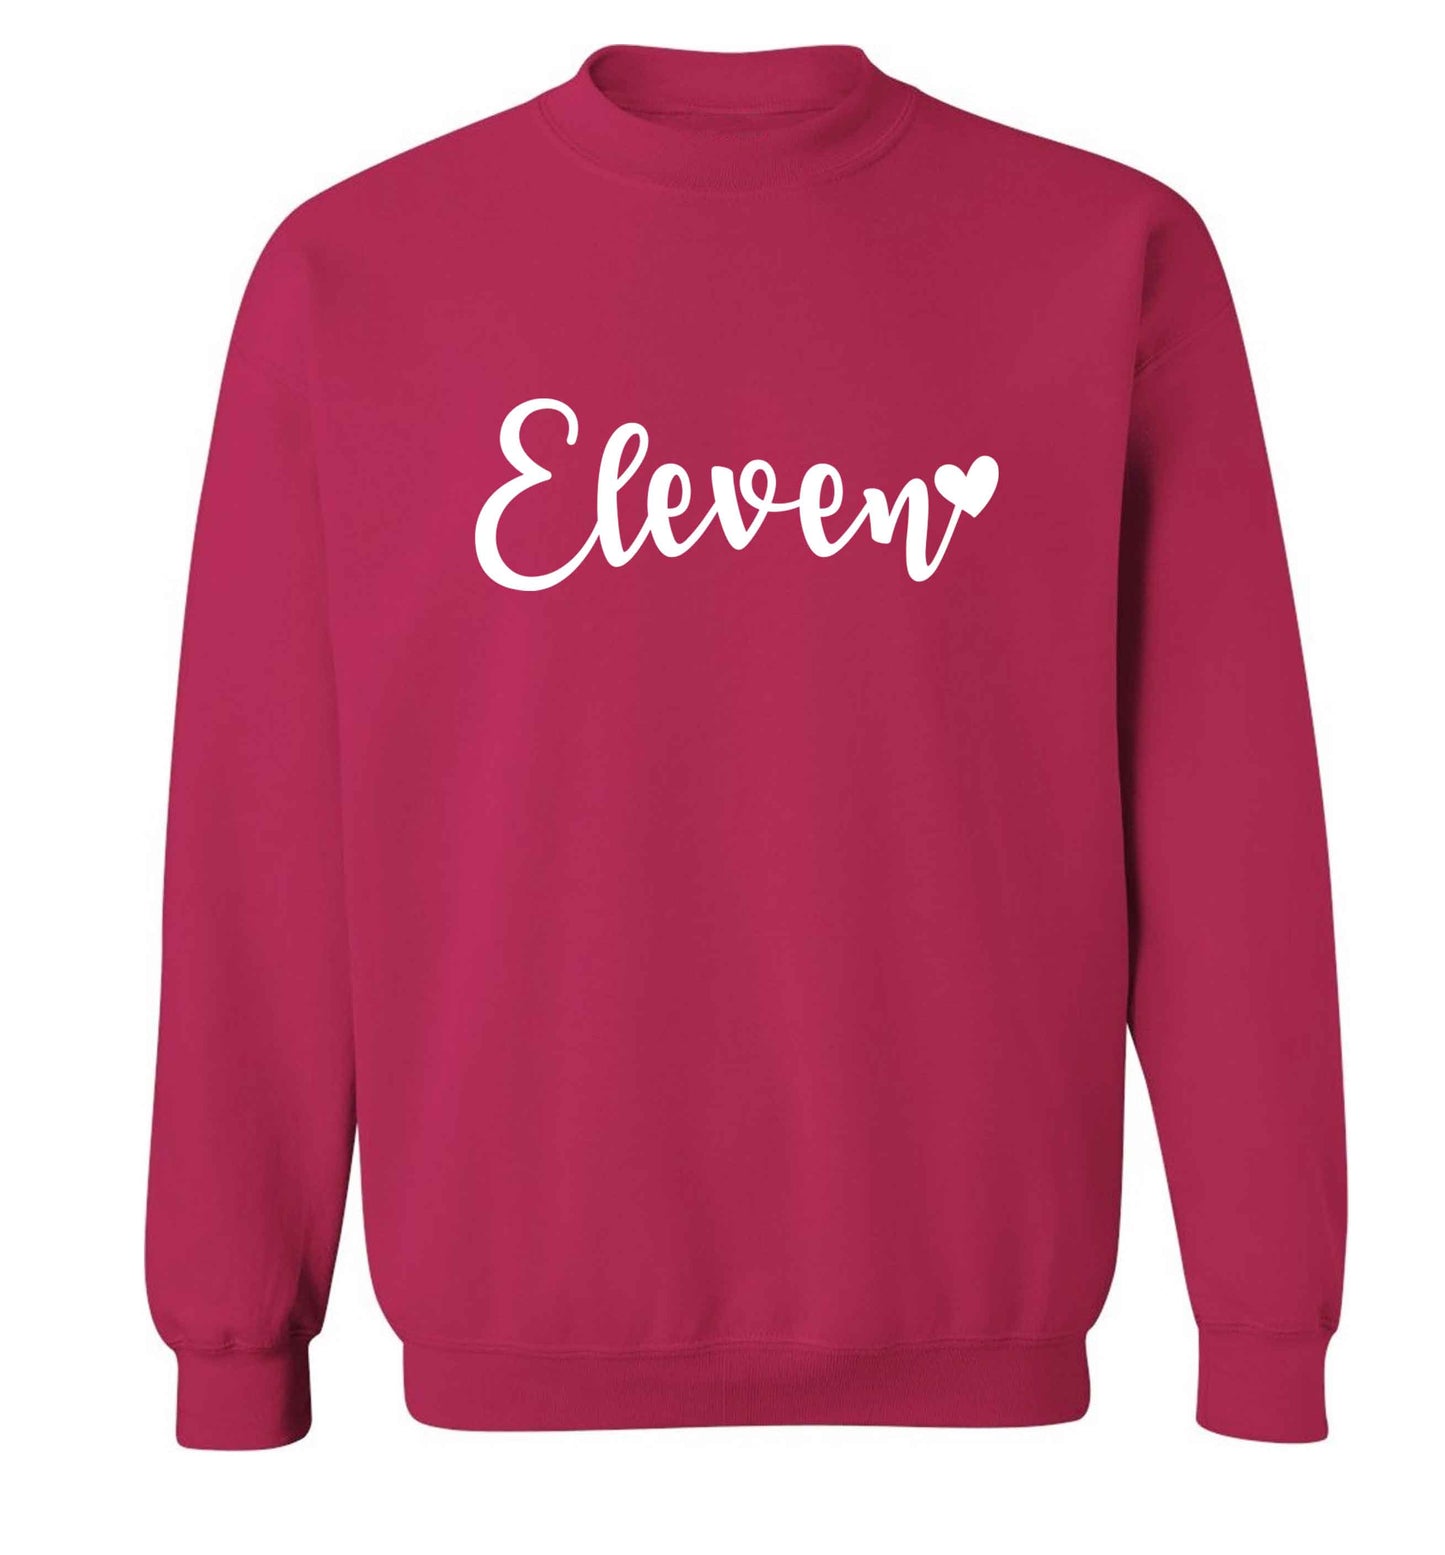 Eleven and heart! adult's unisex pink sweater 2XL